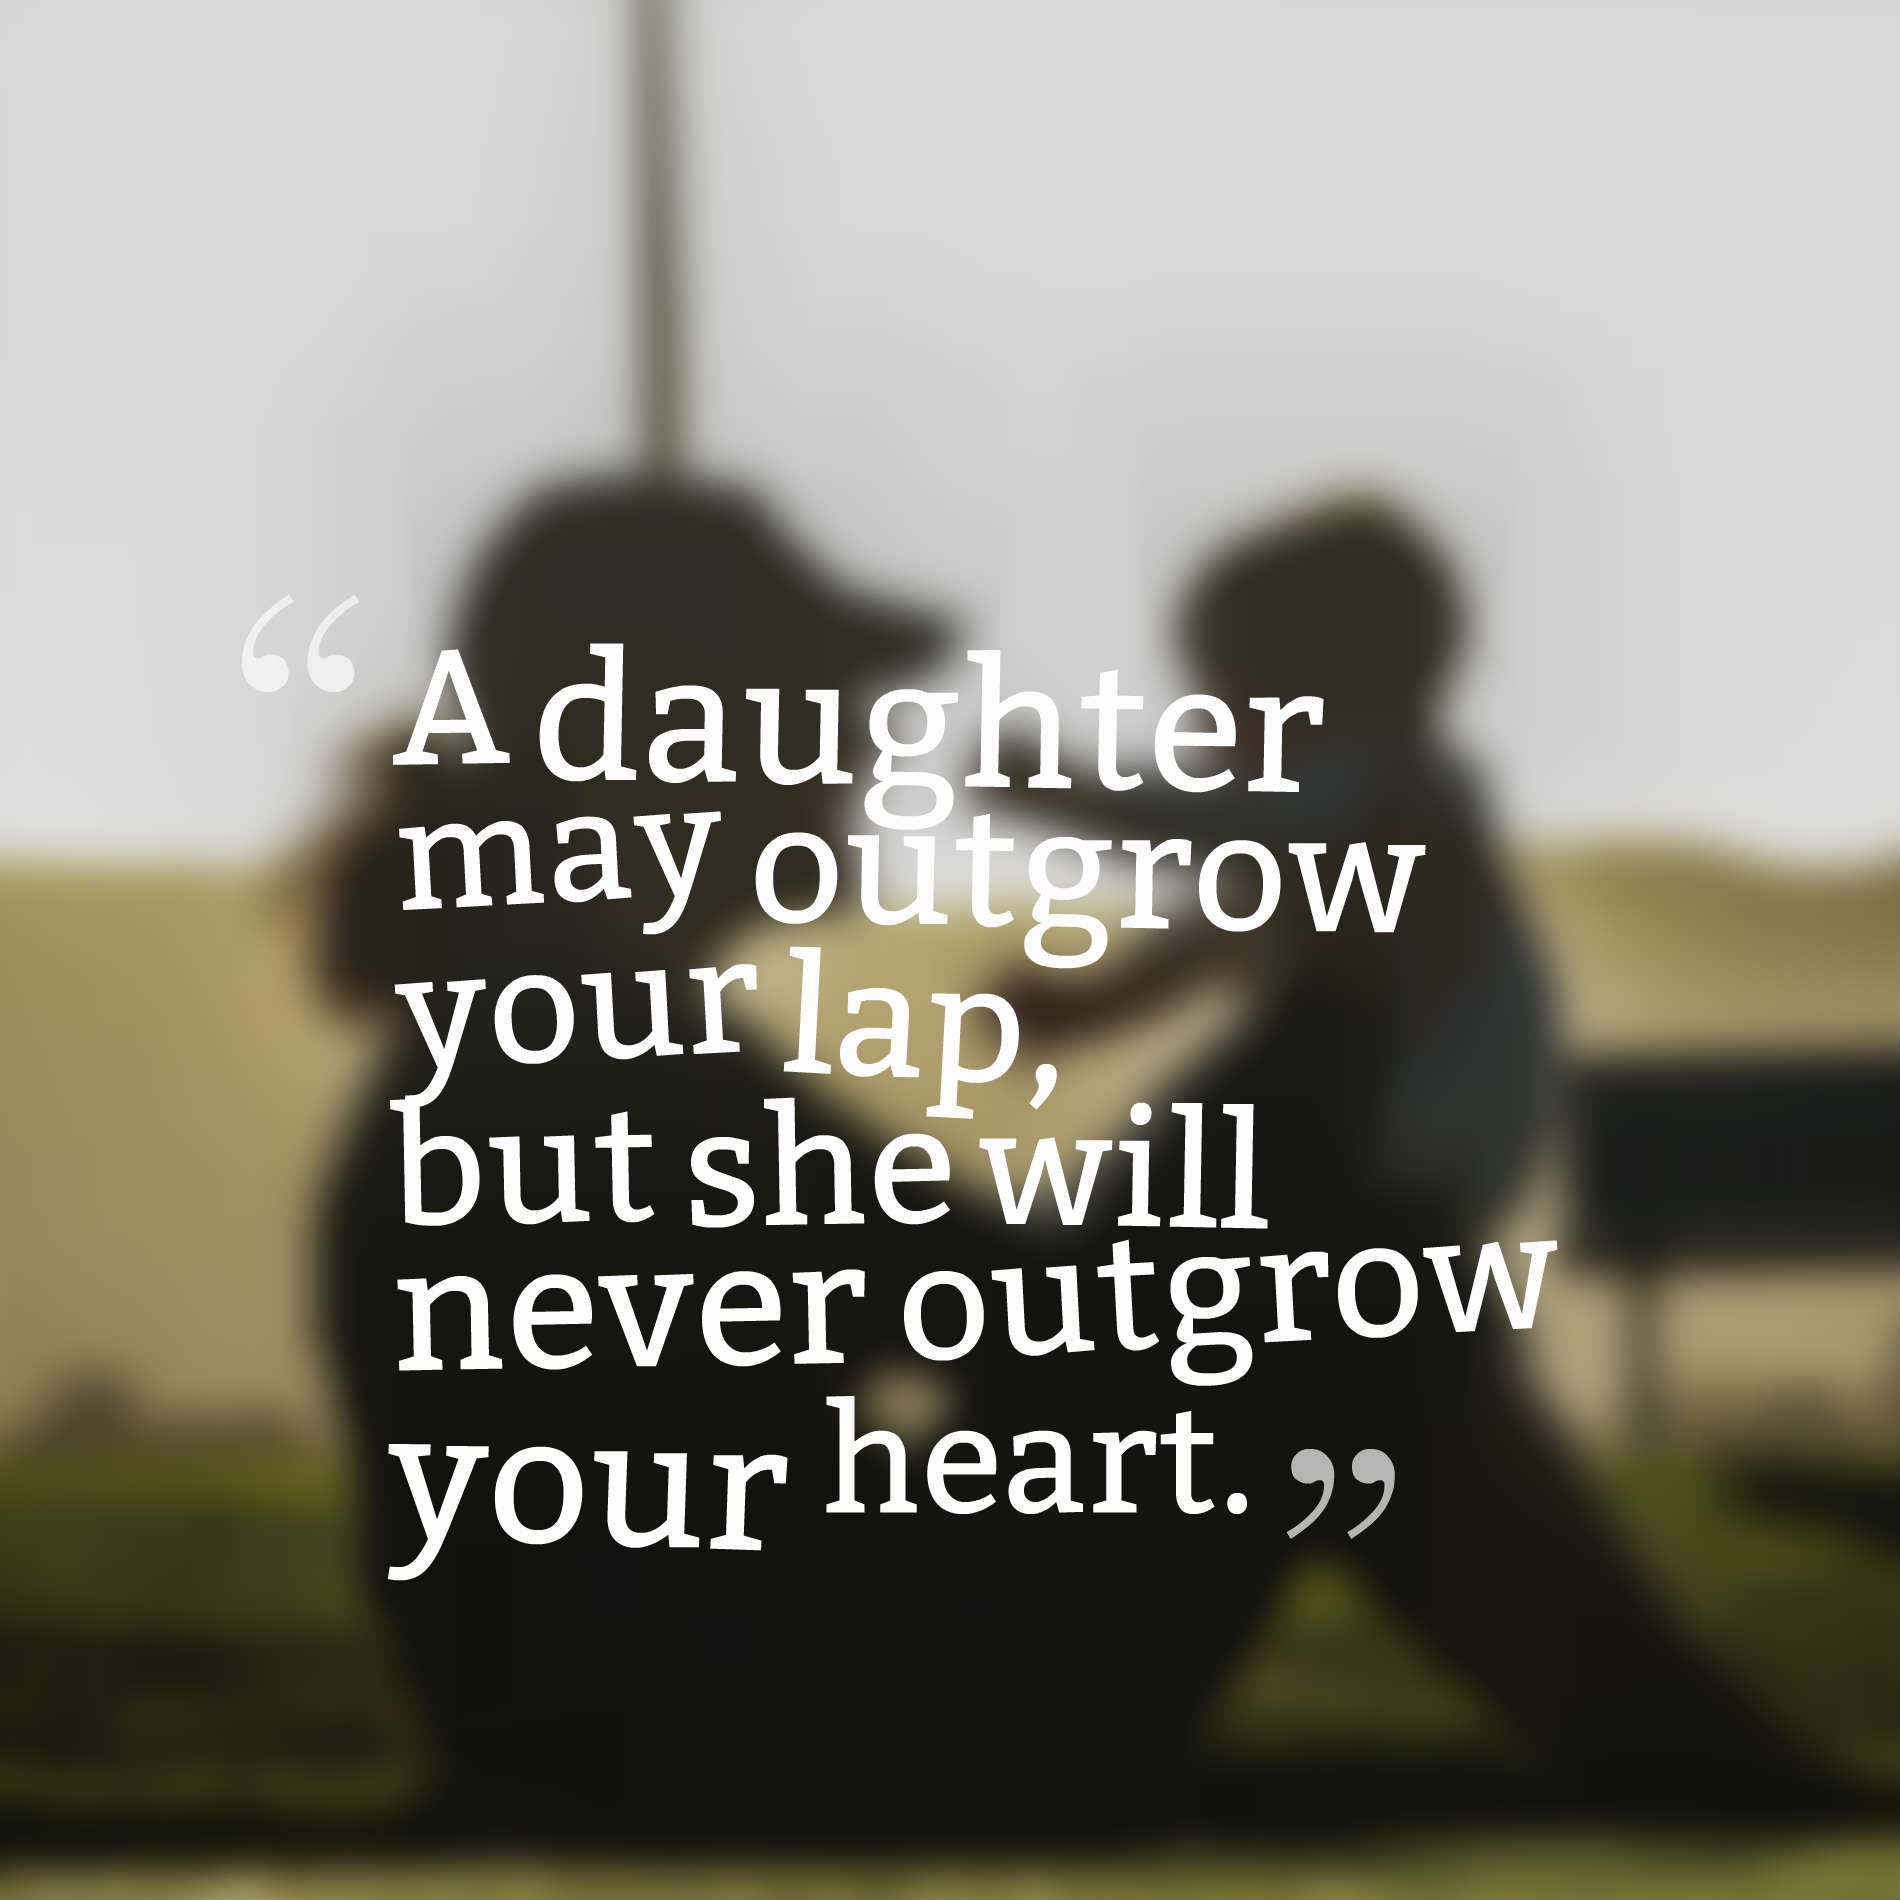 A daughter may outgrow your lap, but she will never outgrow your heart.